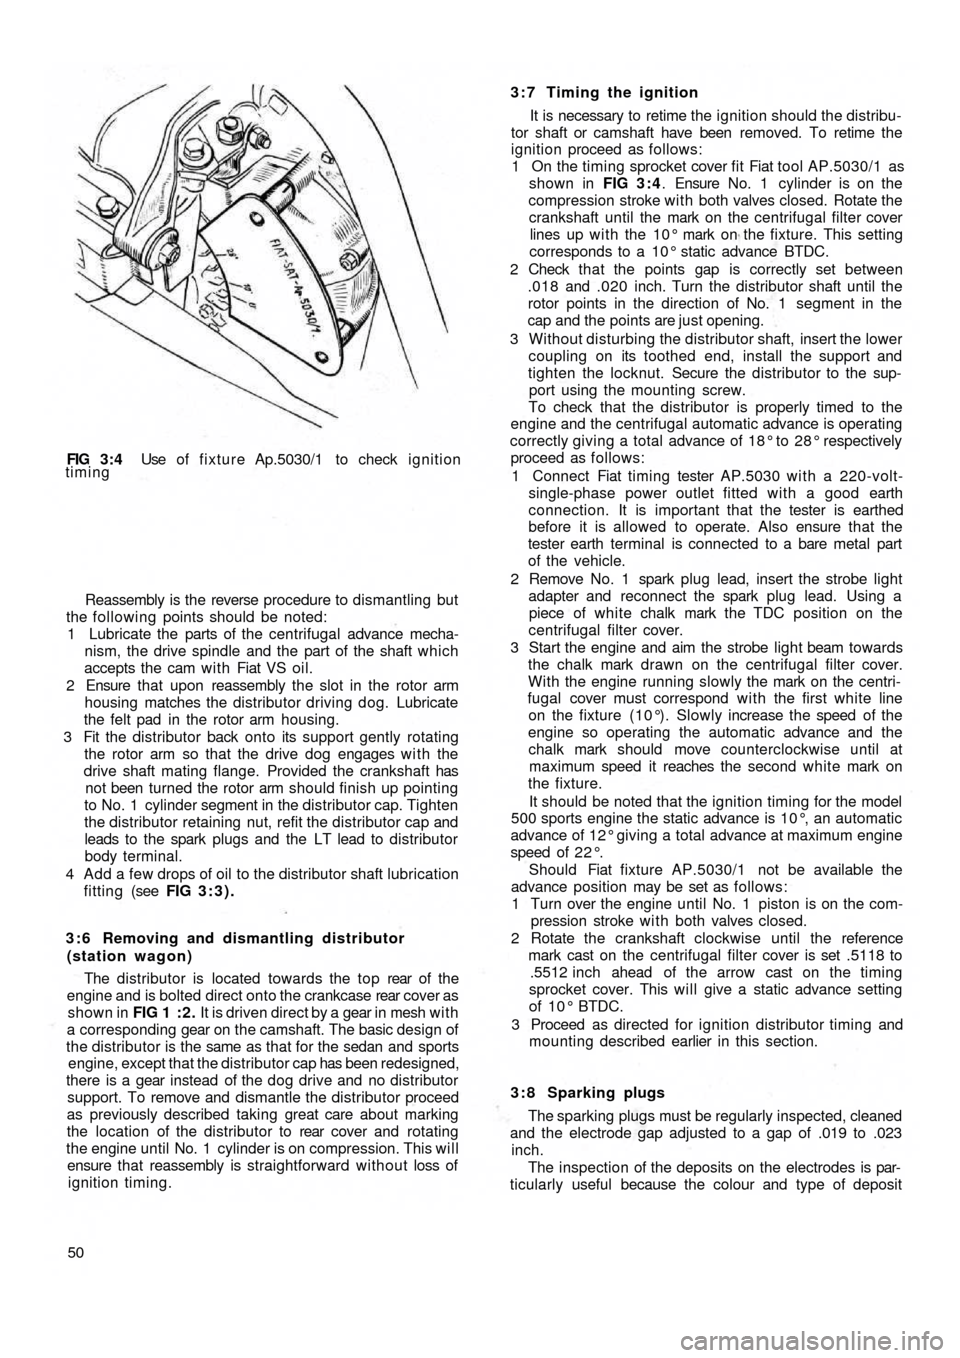 FIAT 500 1970 1.G Service Manual FIG  3 : 4  Use of fixture Ap.5030/1 to check ignition
timing
Reassembly is the reverse procedure to dismantling but
the following points should be noted:
1 Lubricate the parts of the centrifugal adva